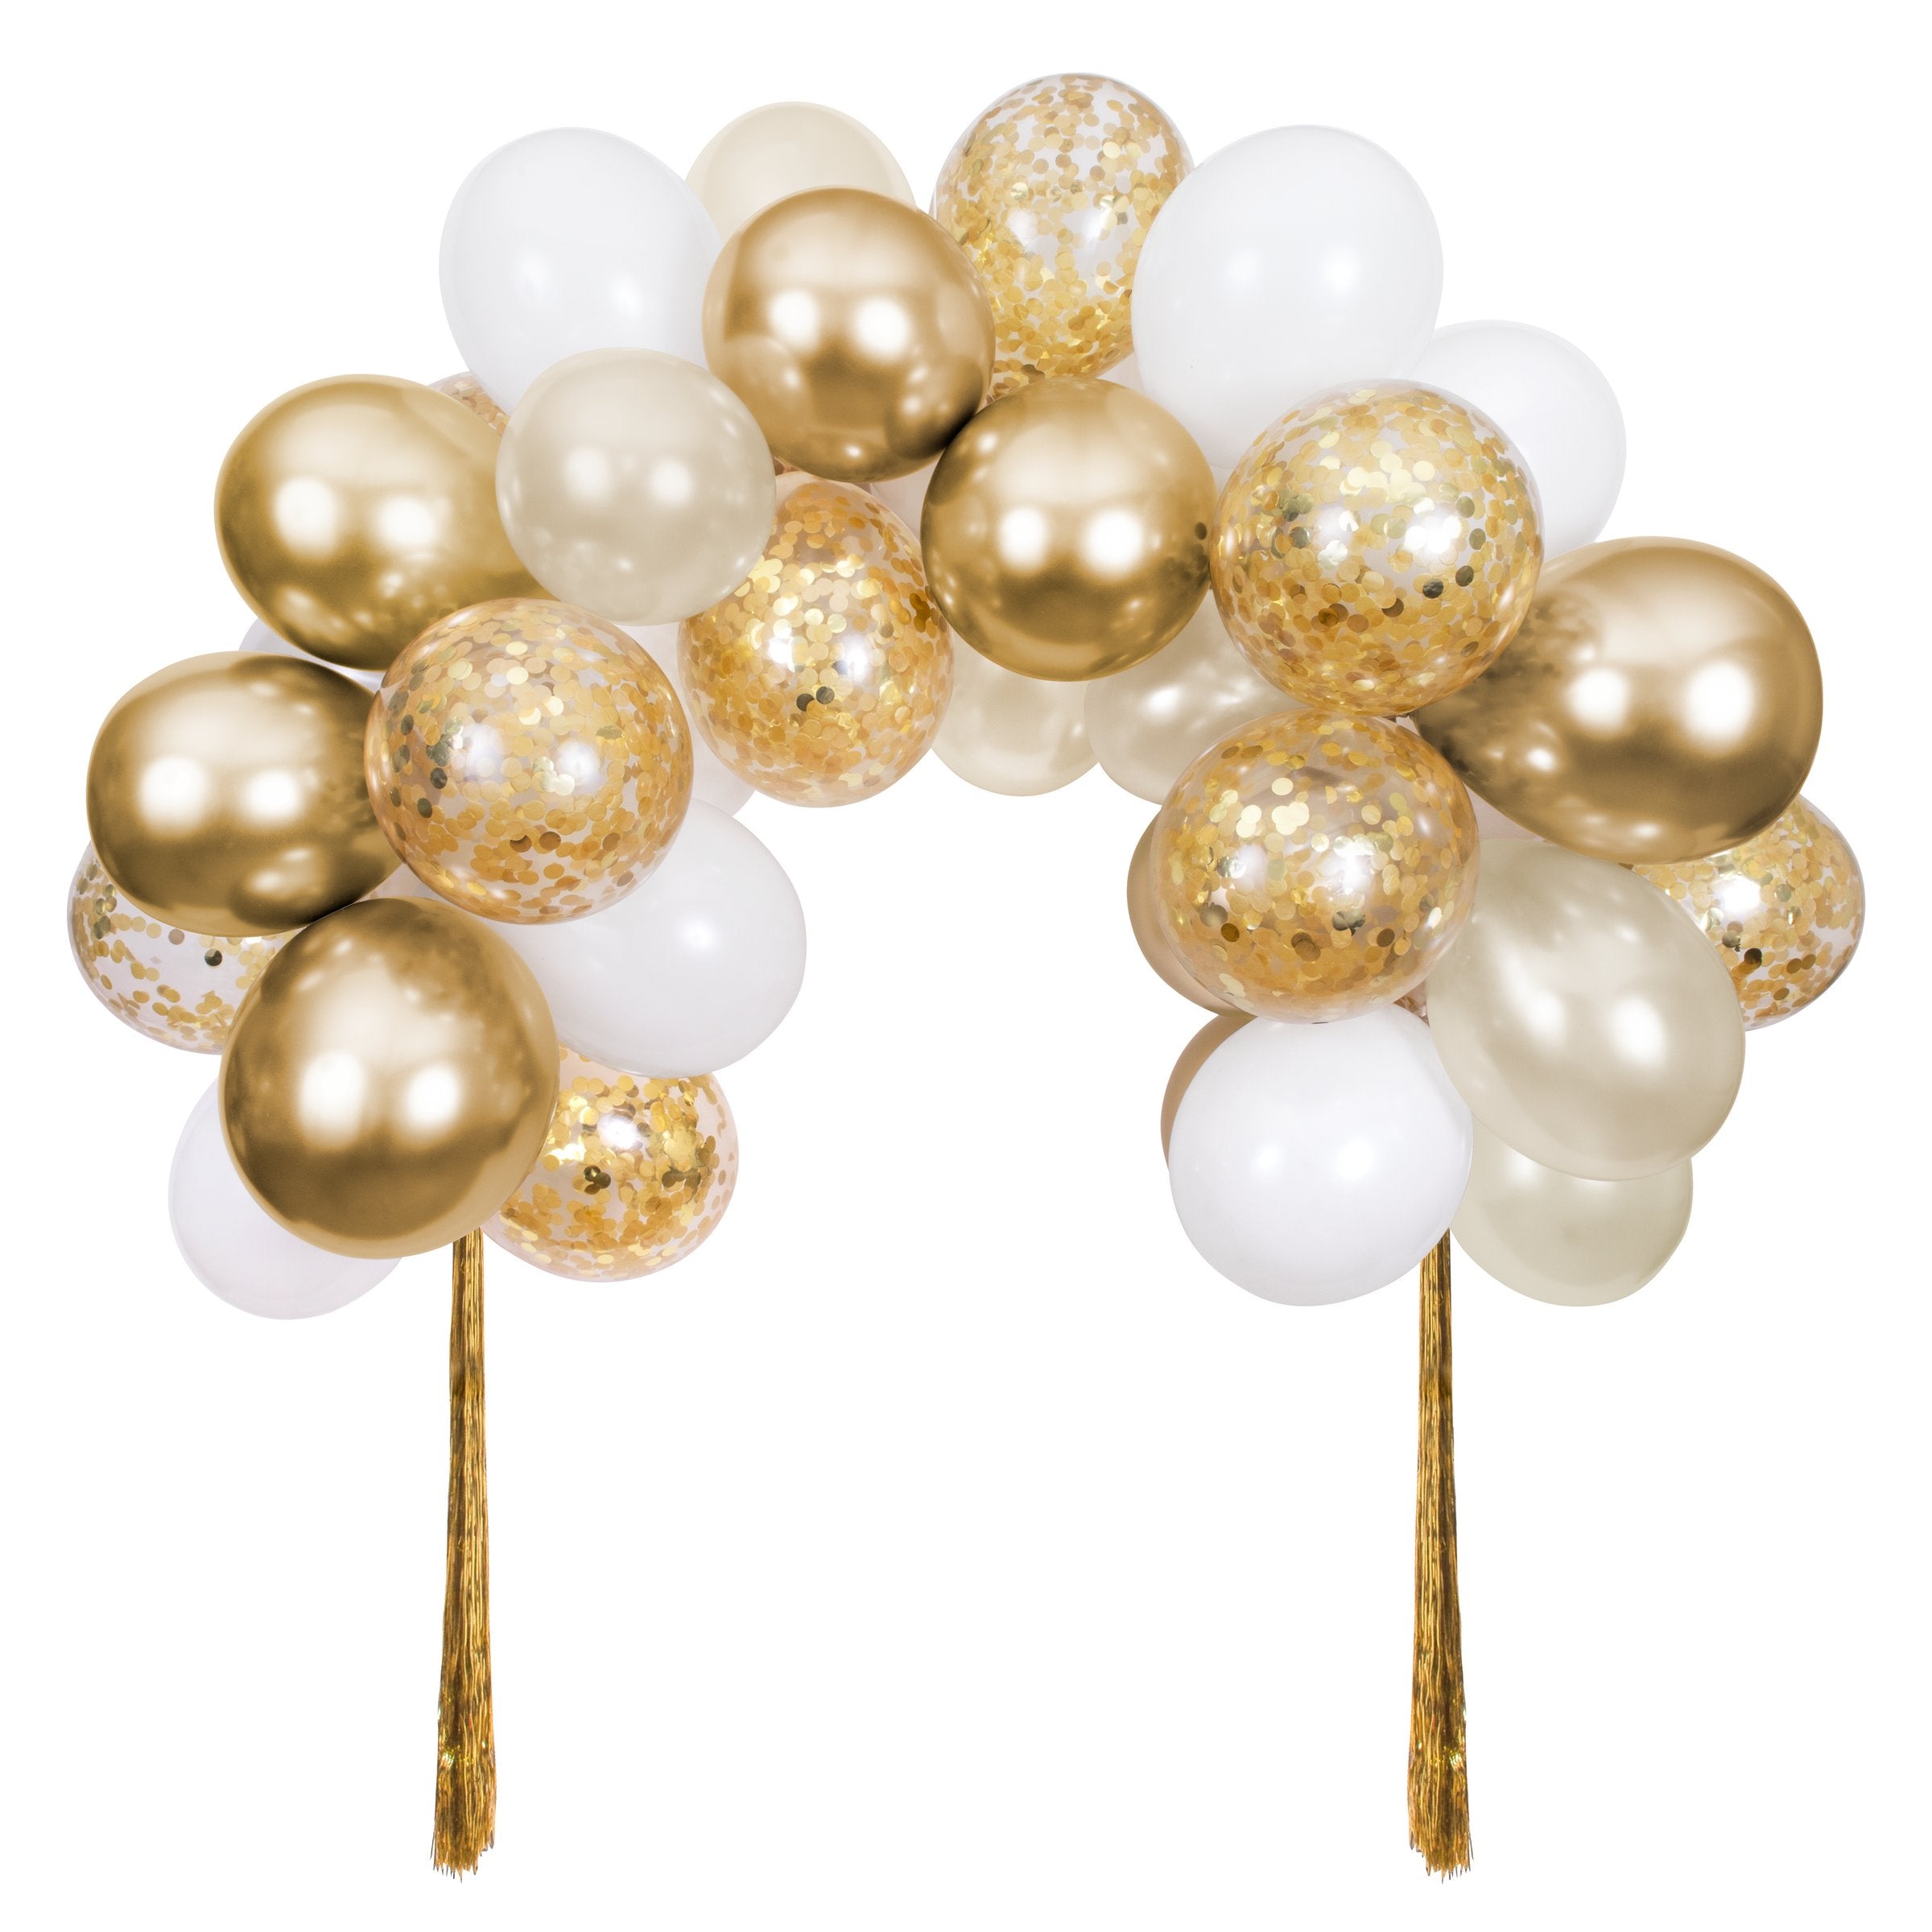 Our special balloon arch, with gold balloons, is the perfect gold anniversary decoration.